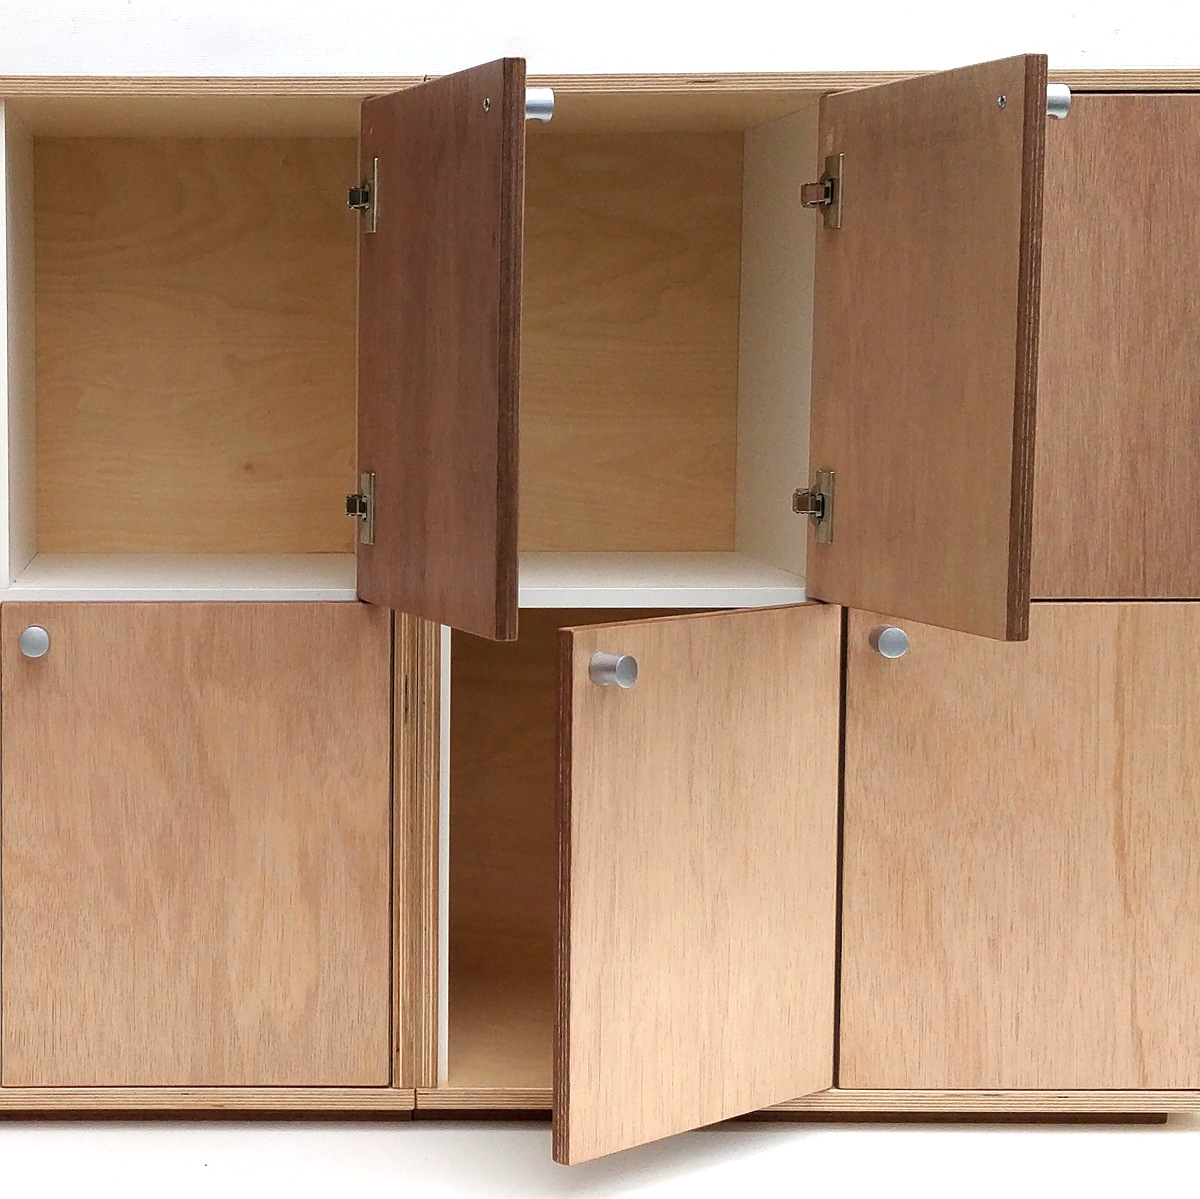 Deluxe Bag Storage Cubbies Hebe Natural Childrens Furniture NZ 